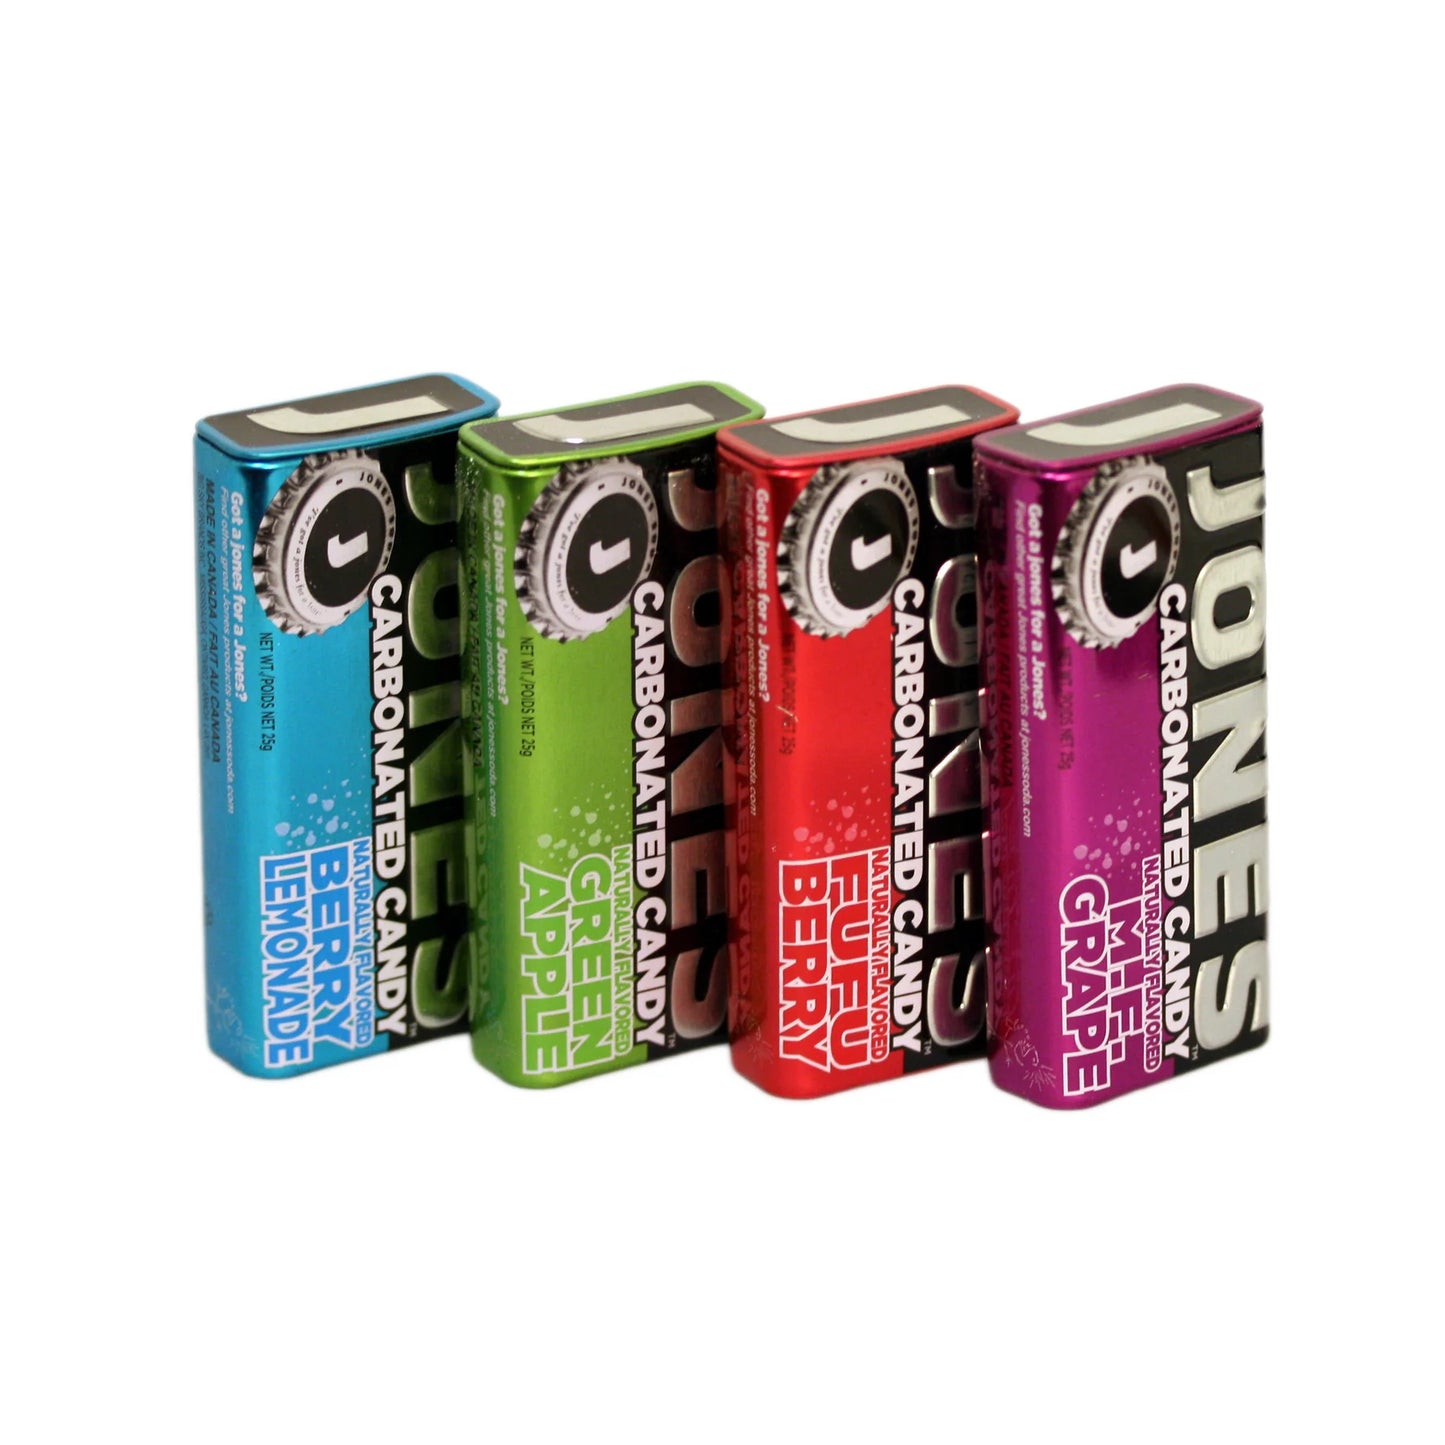 JONES CARBONATED CANDY - 4 FLAVOR PACK